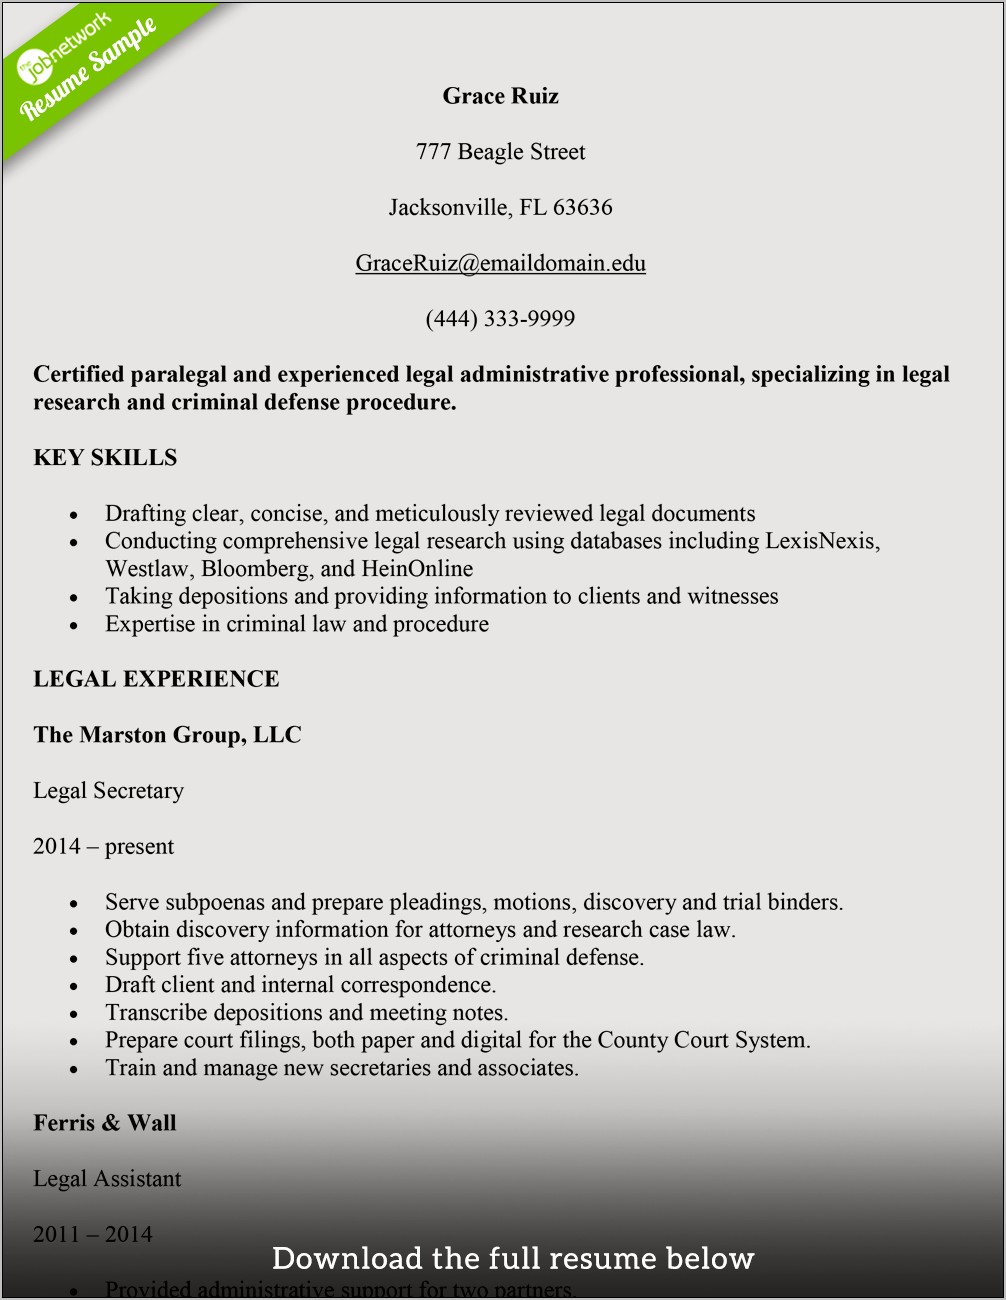 Examples Of Legal Secretary Summary For Resumes